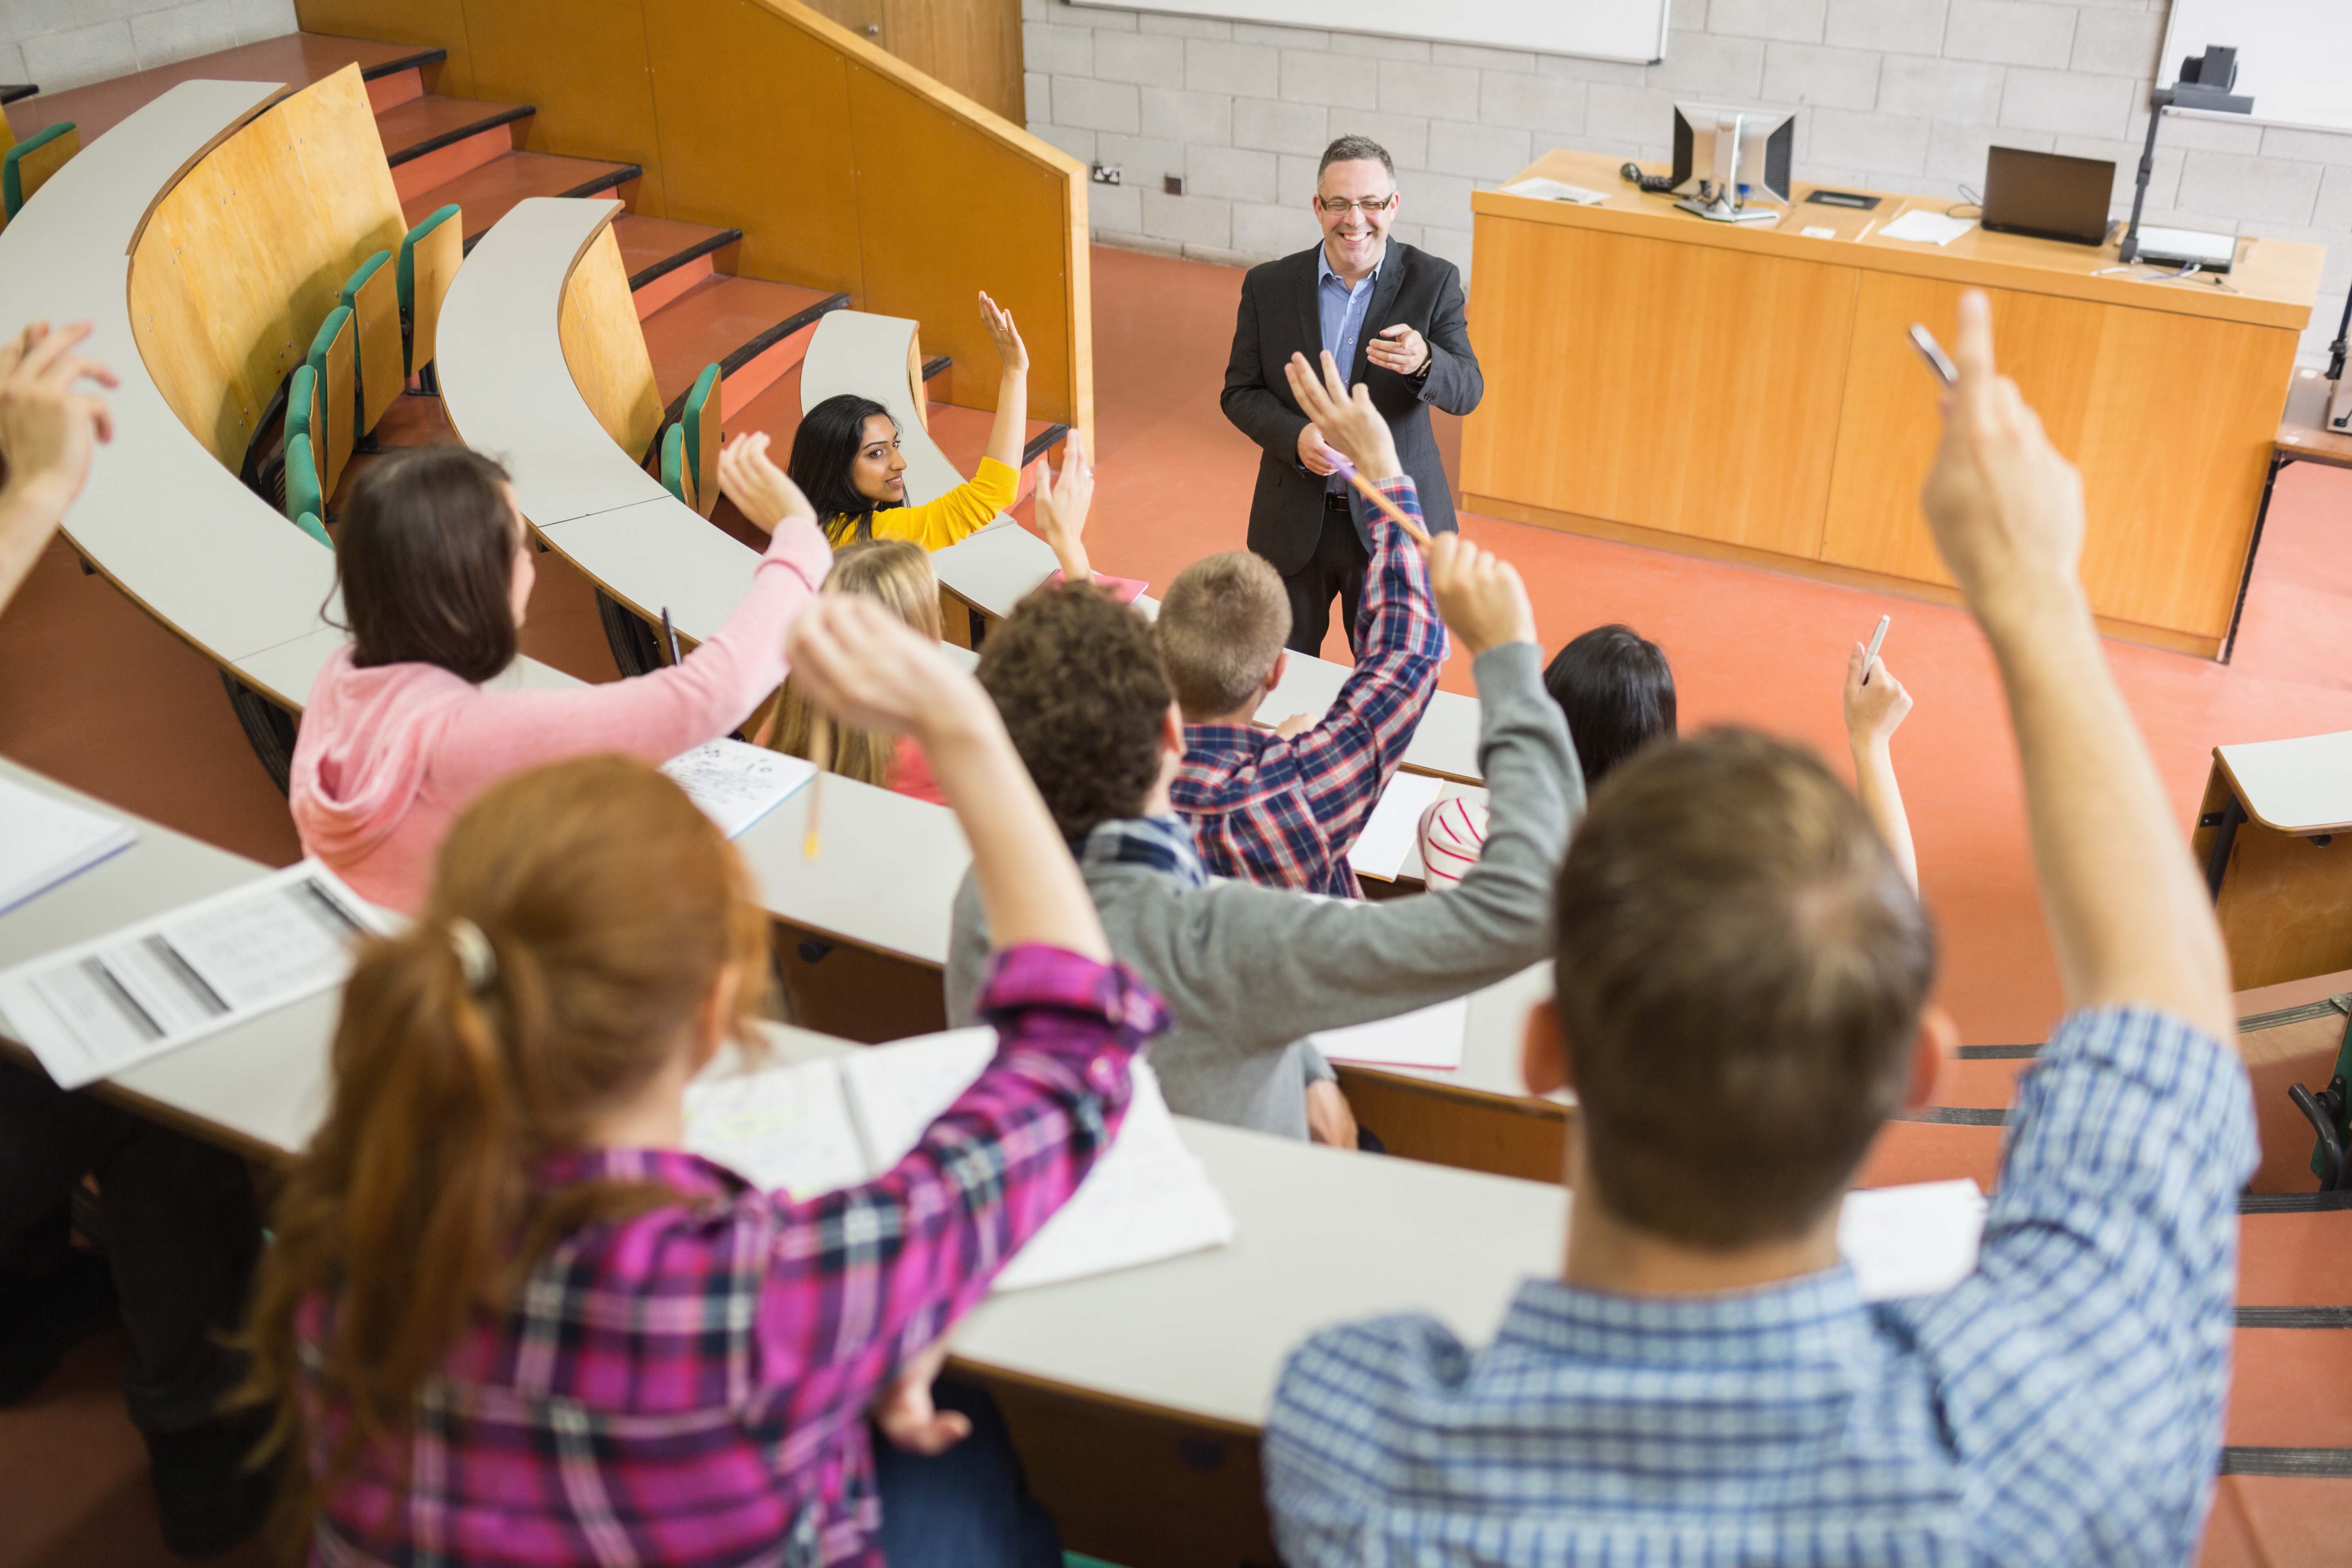 Professor addressing students inside a college lecture hall.
